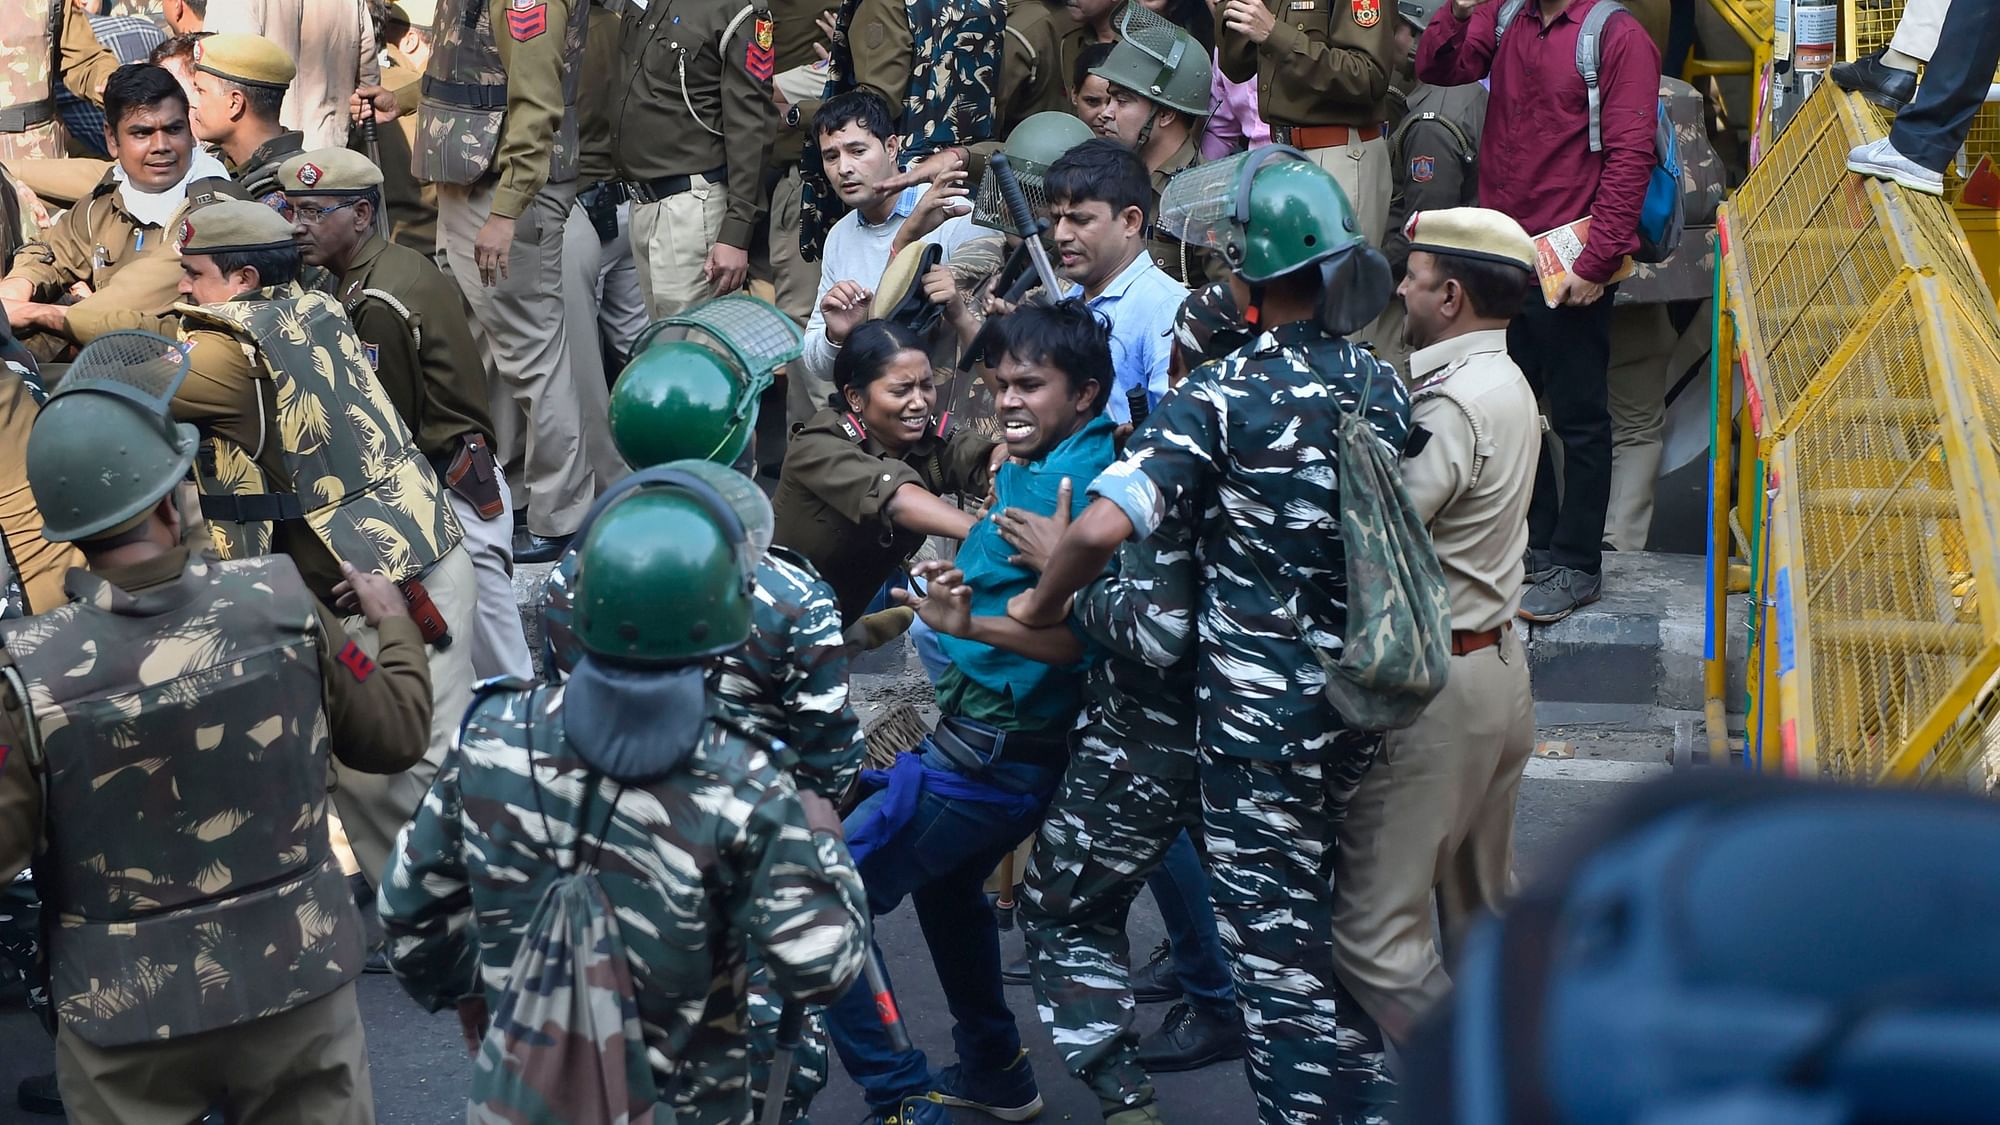 CRPF personnel attempt to stop a JNU student from crossing the barricades during a protest march towards Parliament, on the first day of the Winter Session, in New Delhi, Monday 18 November.